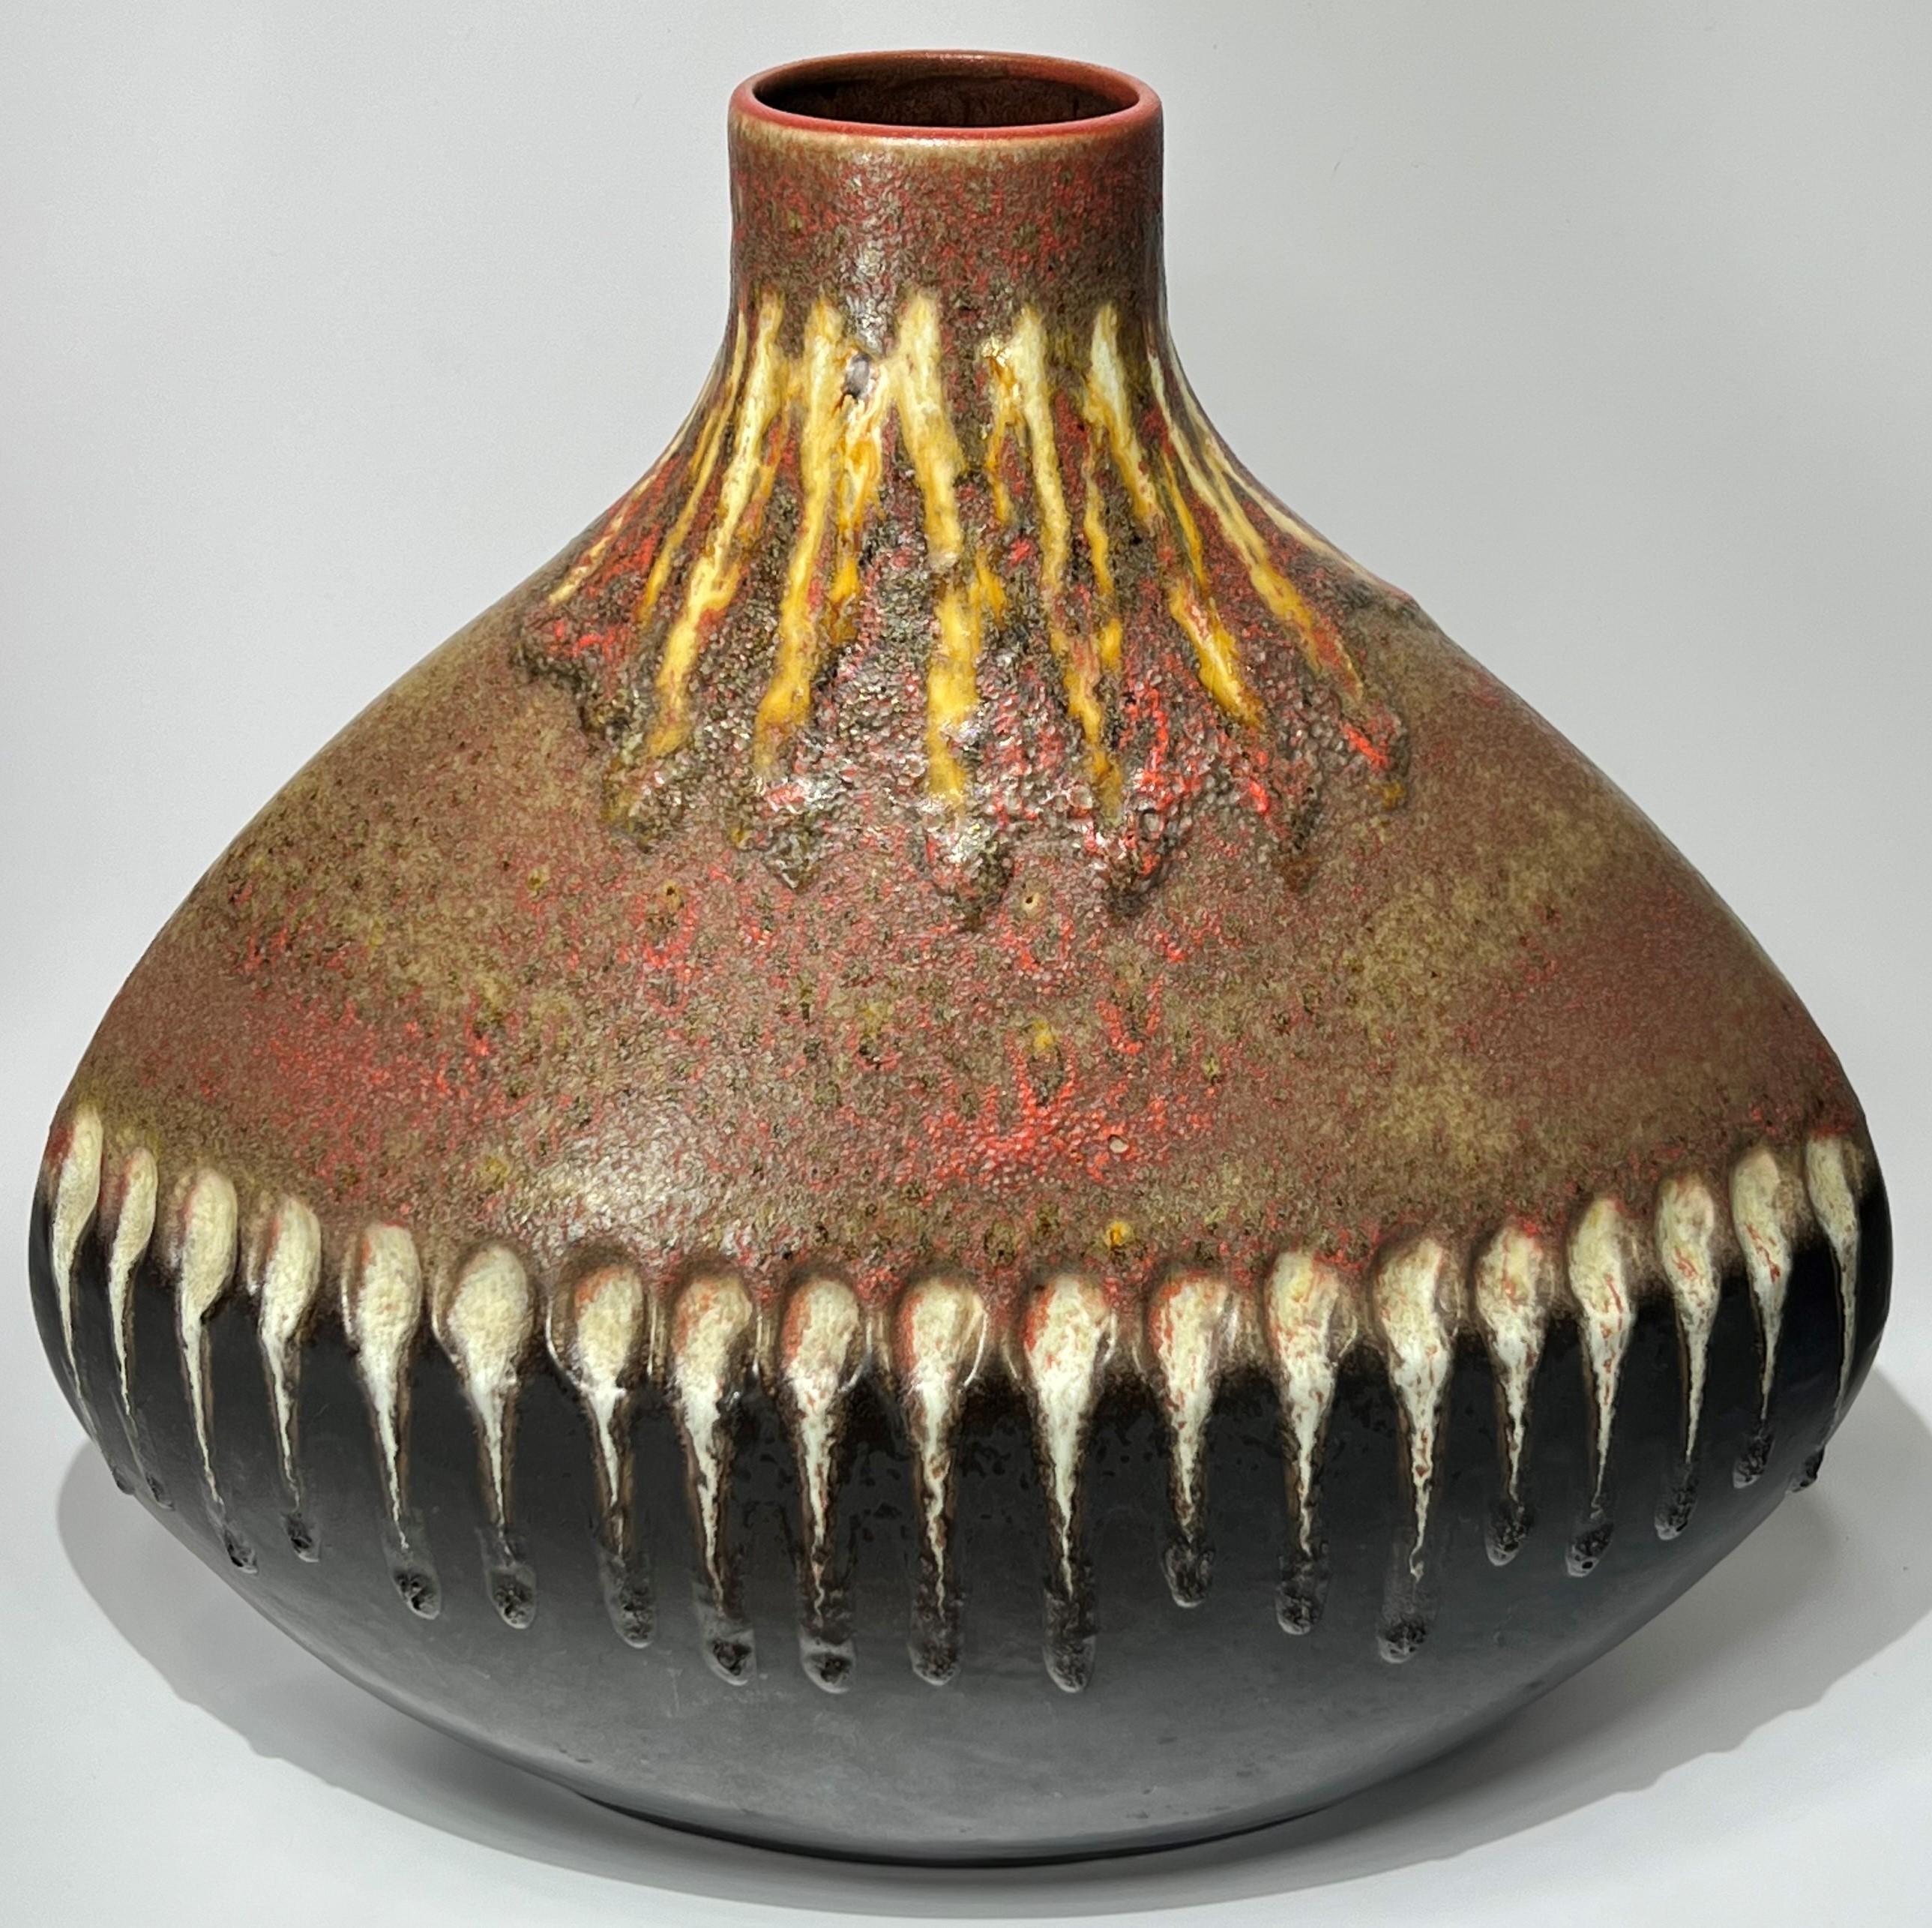 Pottery Huge Carstens Tönnieshof Fat Lava Vase with Extraordinary Sculptural Form, C1970